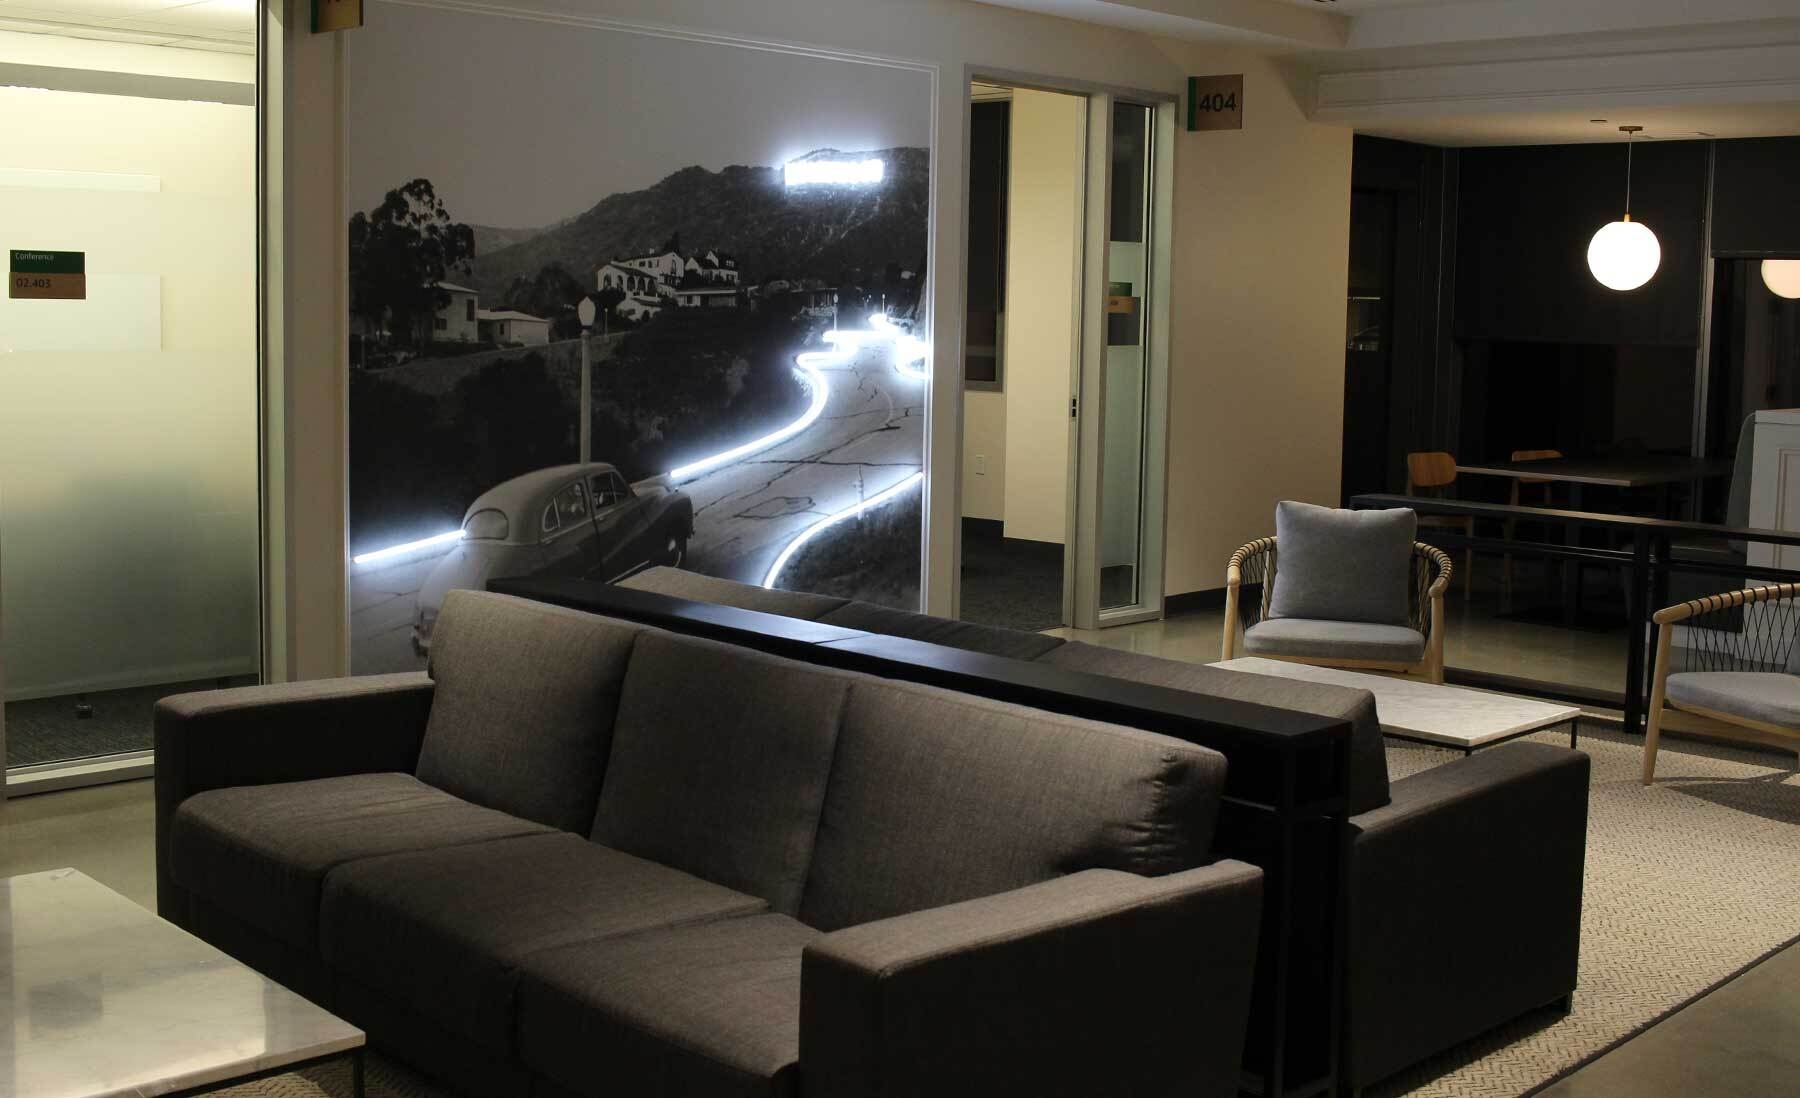 An image of a sitting area with a lit-up mural on the wall showing the hollywood sign